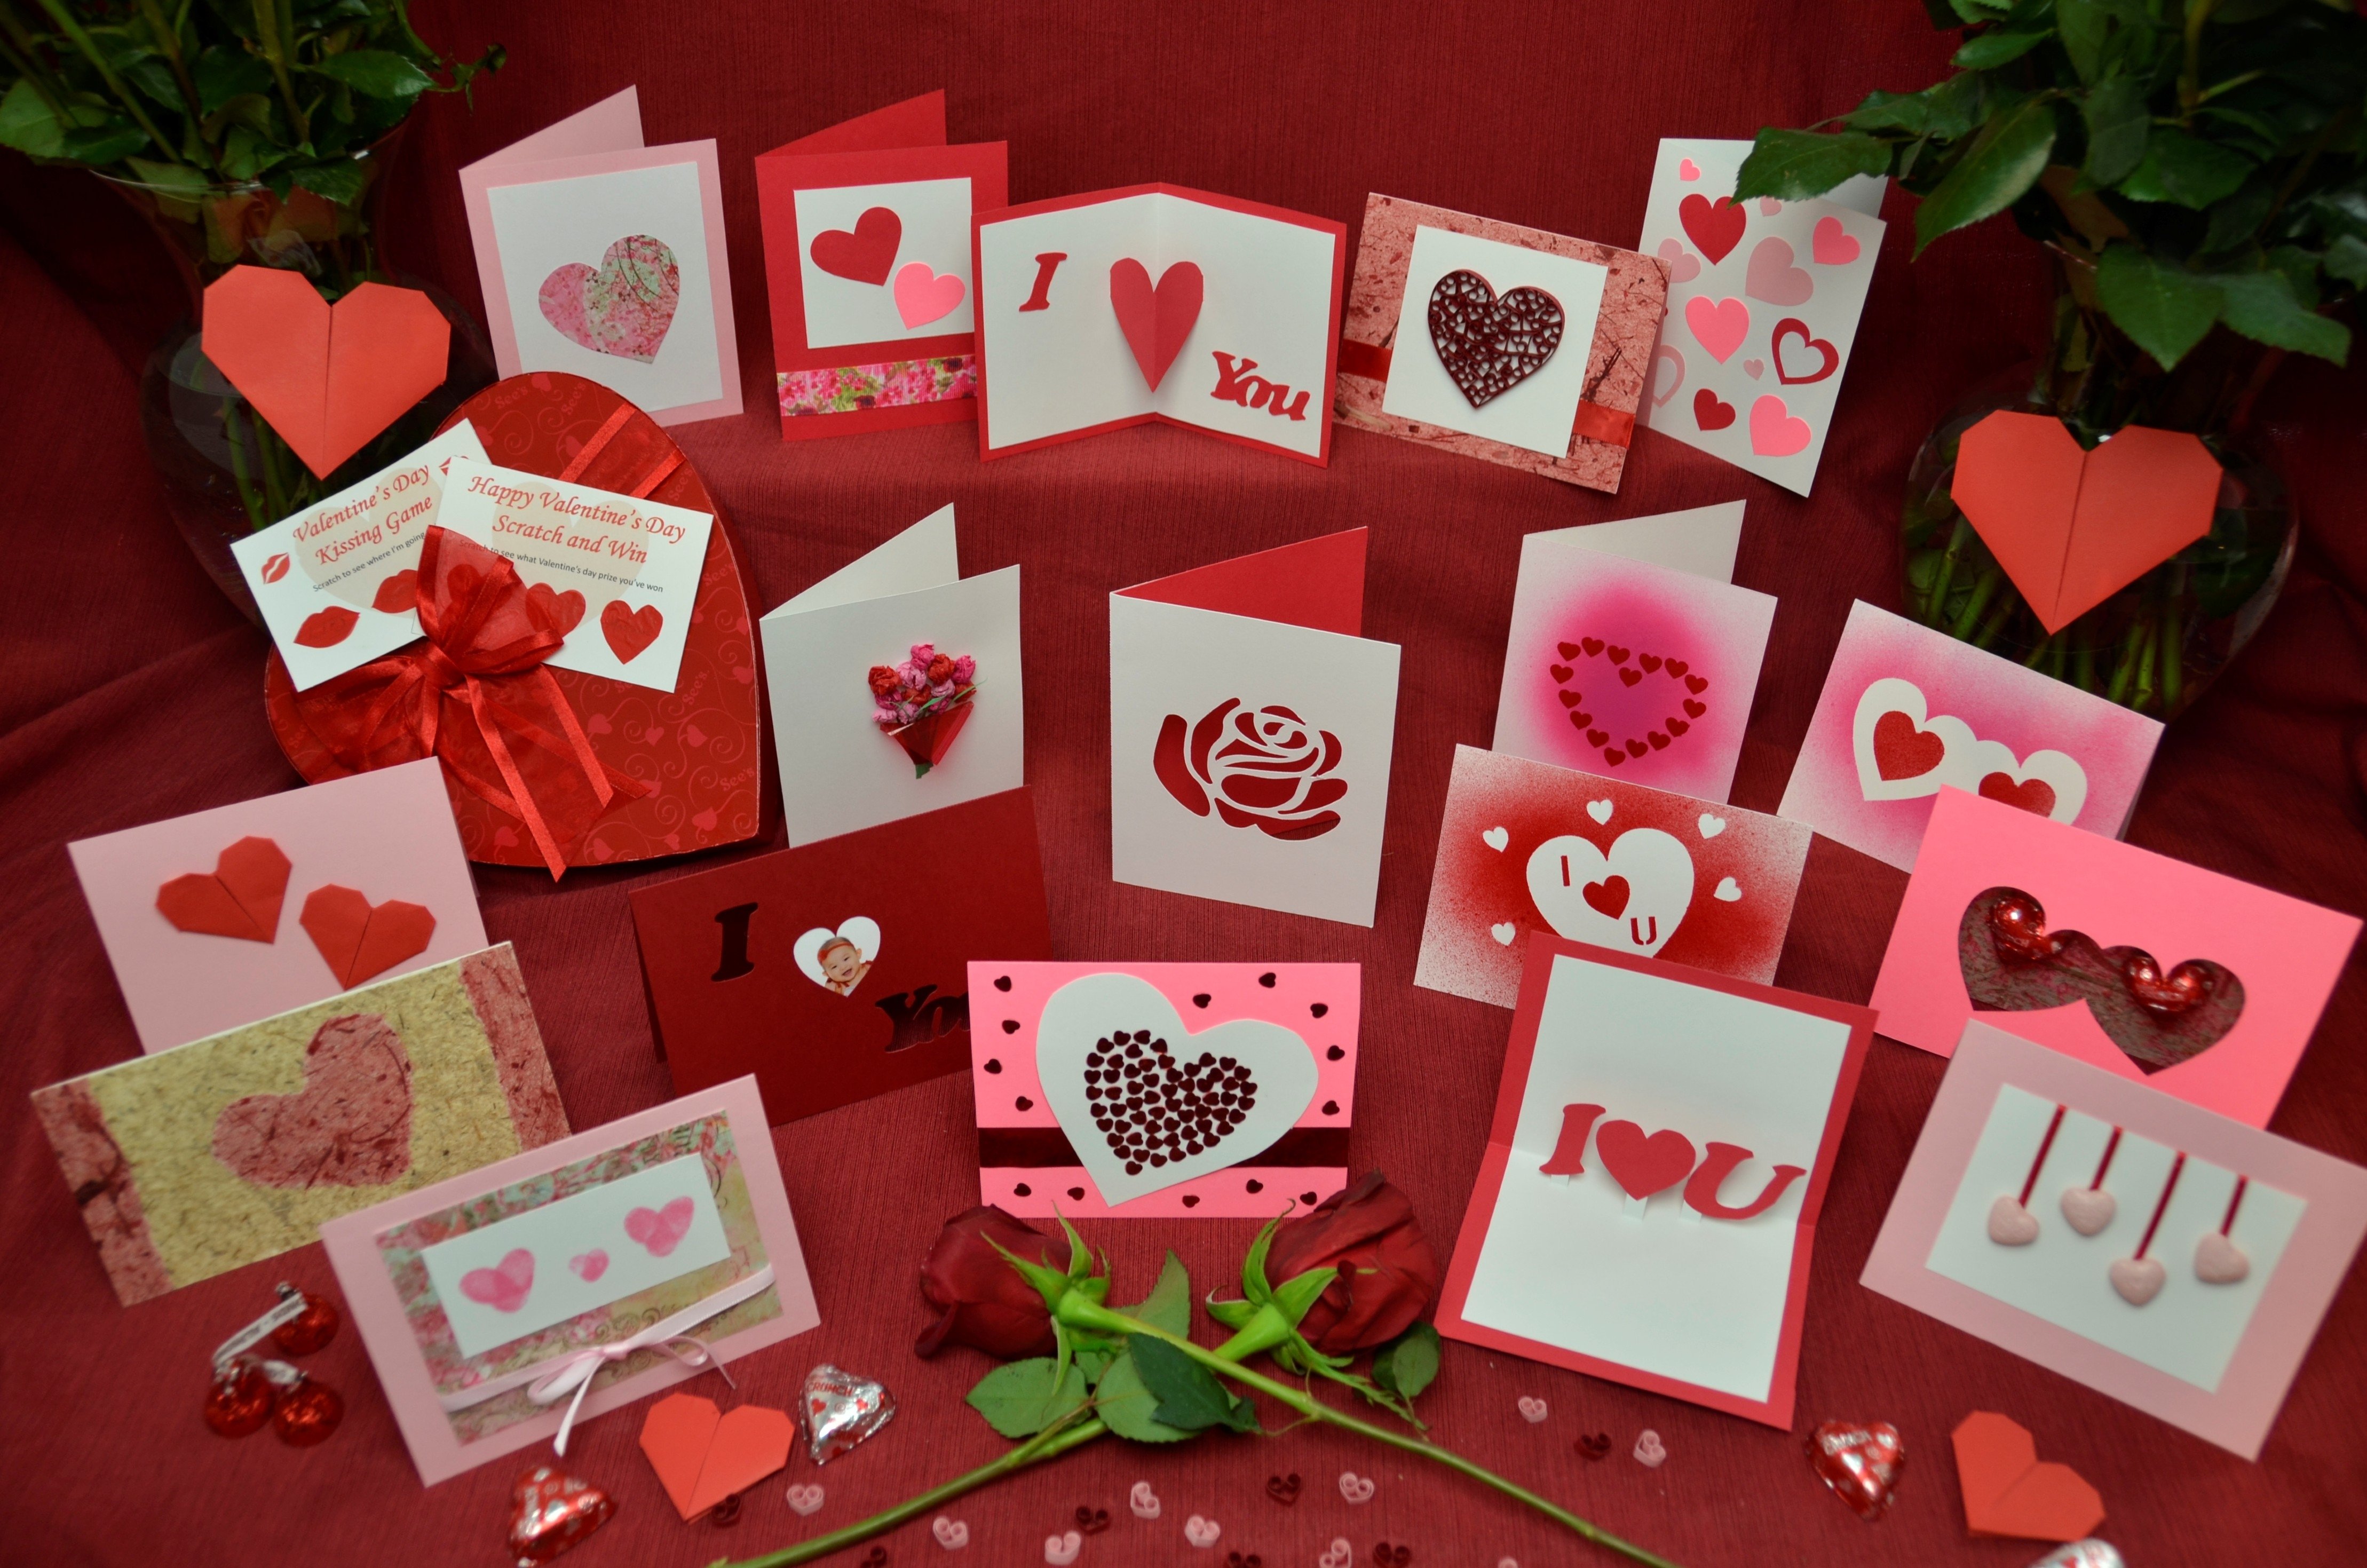 10 Perfect Good Ideas For Valentines Day For Her top 10 ideas for valentines day cards creative pop up cards 16 2022